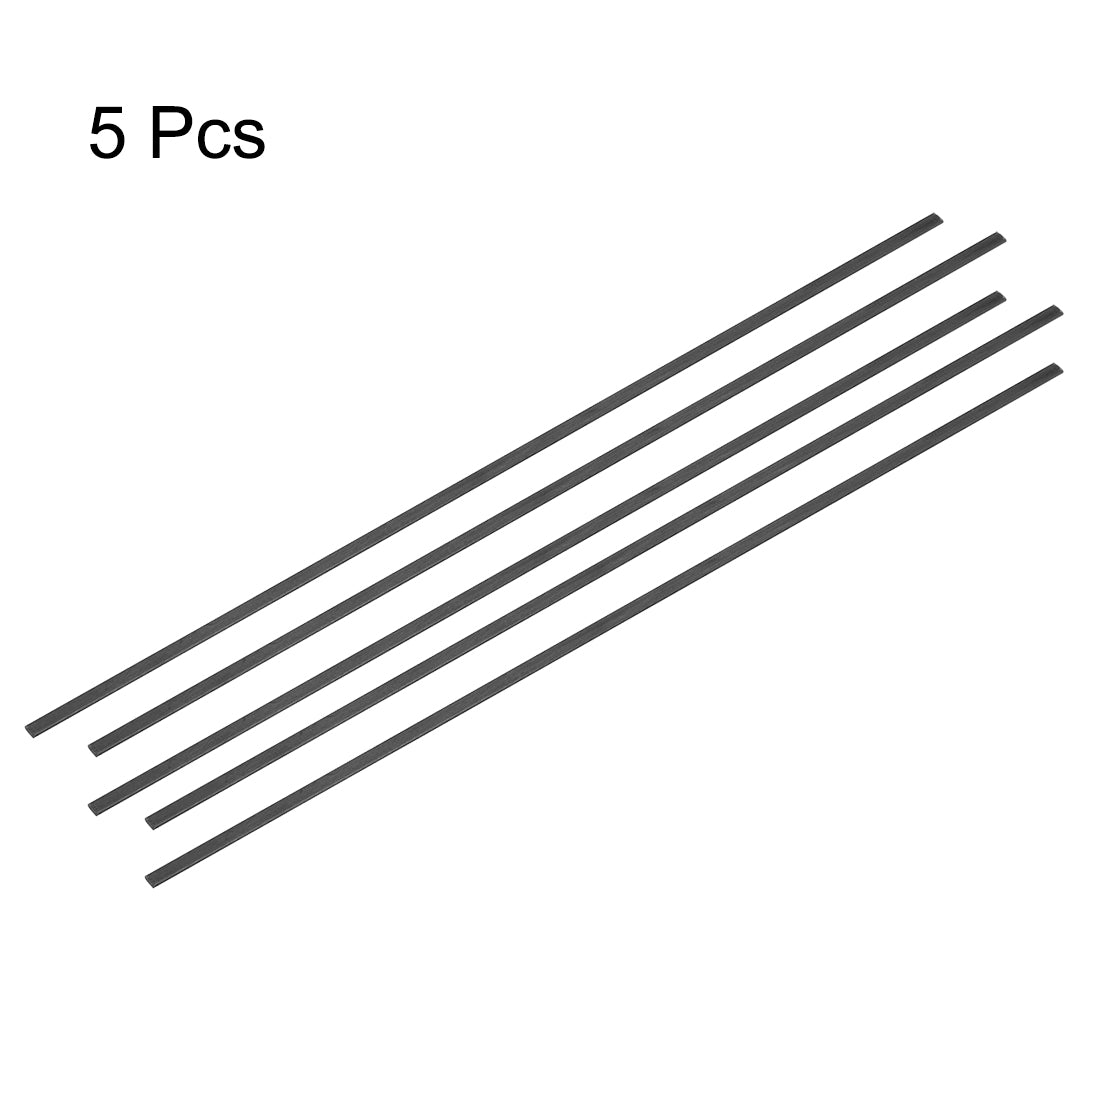 uxcell Uxcell Carbon Fiber Strip Bars 1x3mm 600mm Length Pultruded Carbon Fiber Strips for Kites, RC Airplane 5 Pcs